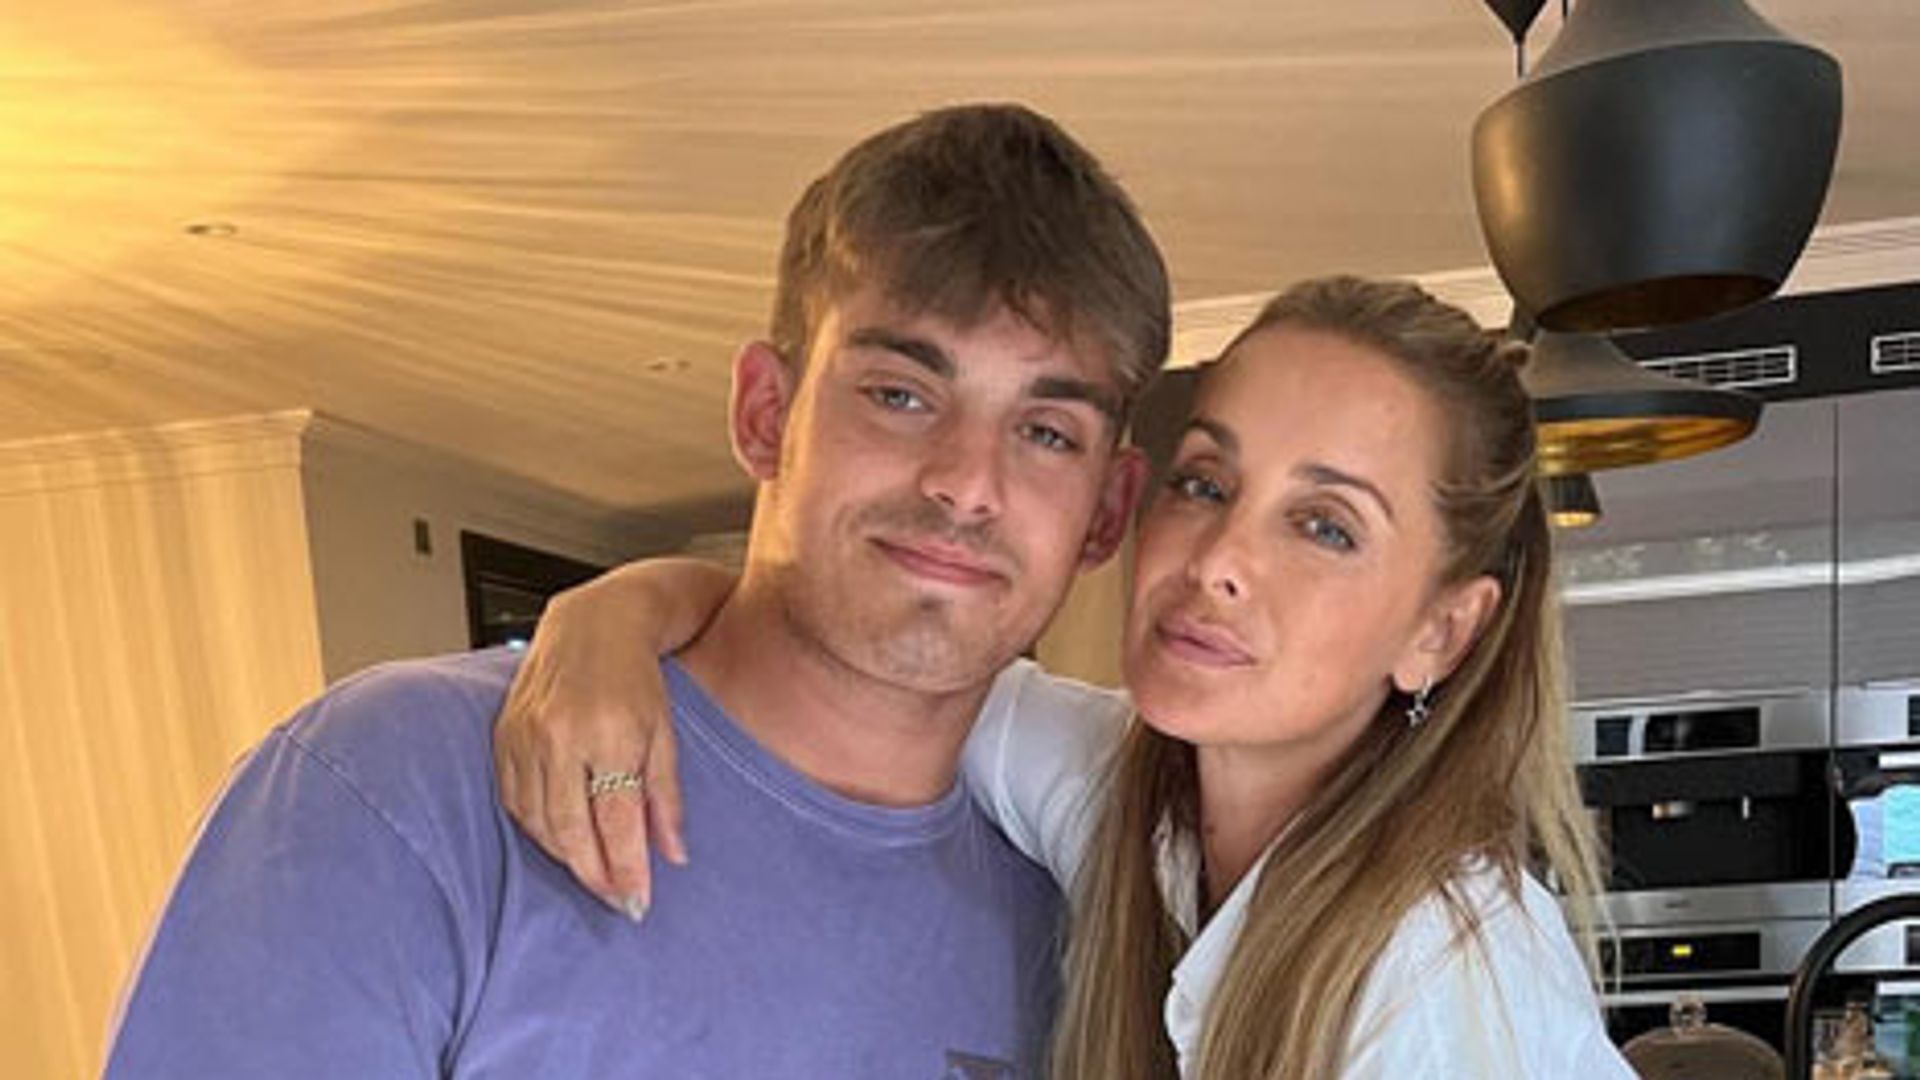 Louise Redknapp posing with her son Charley